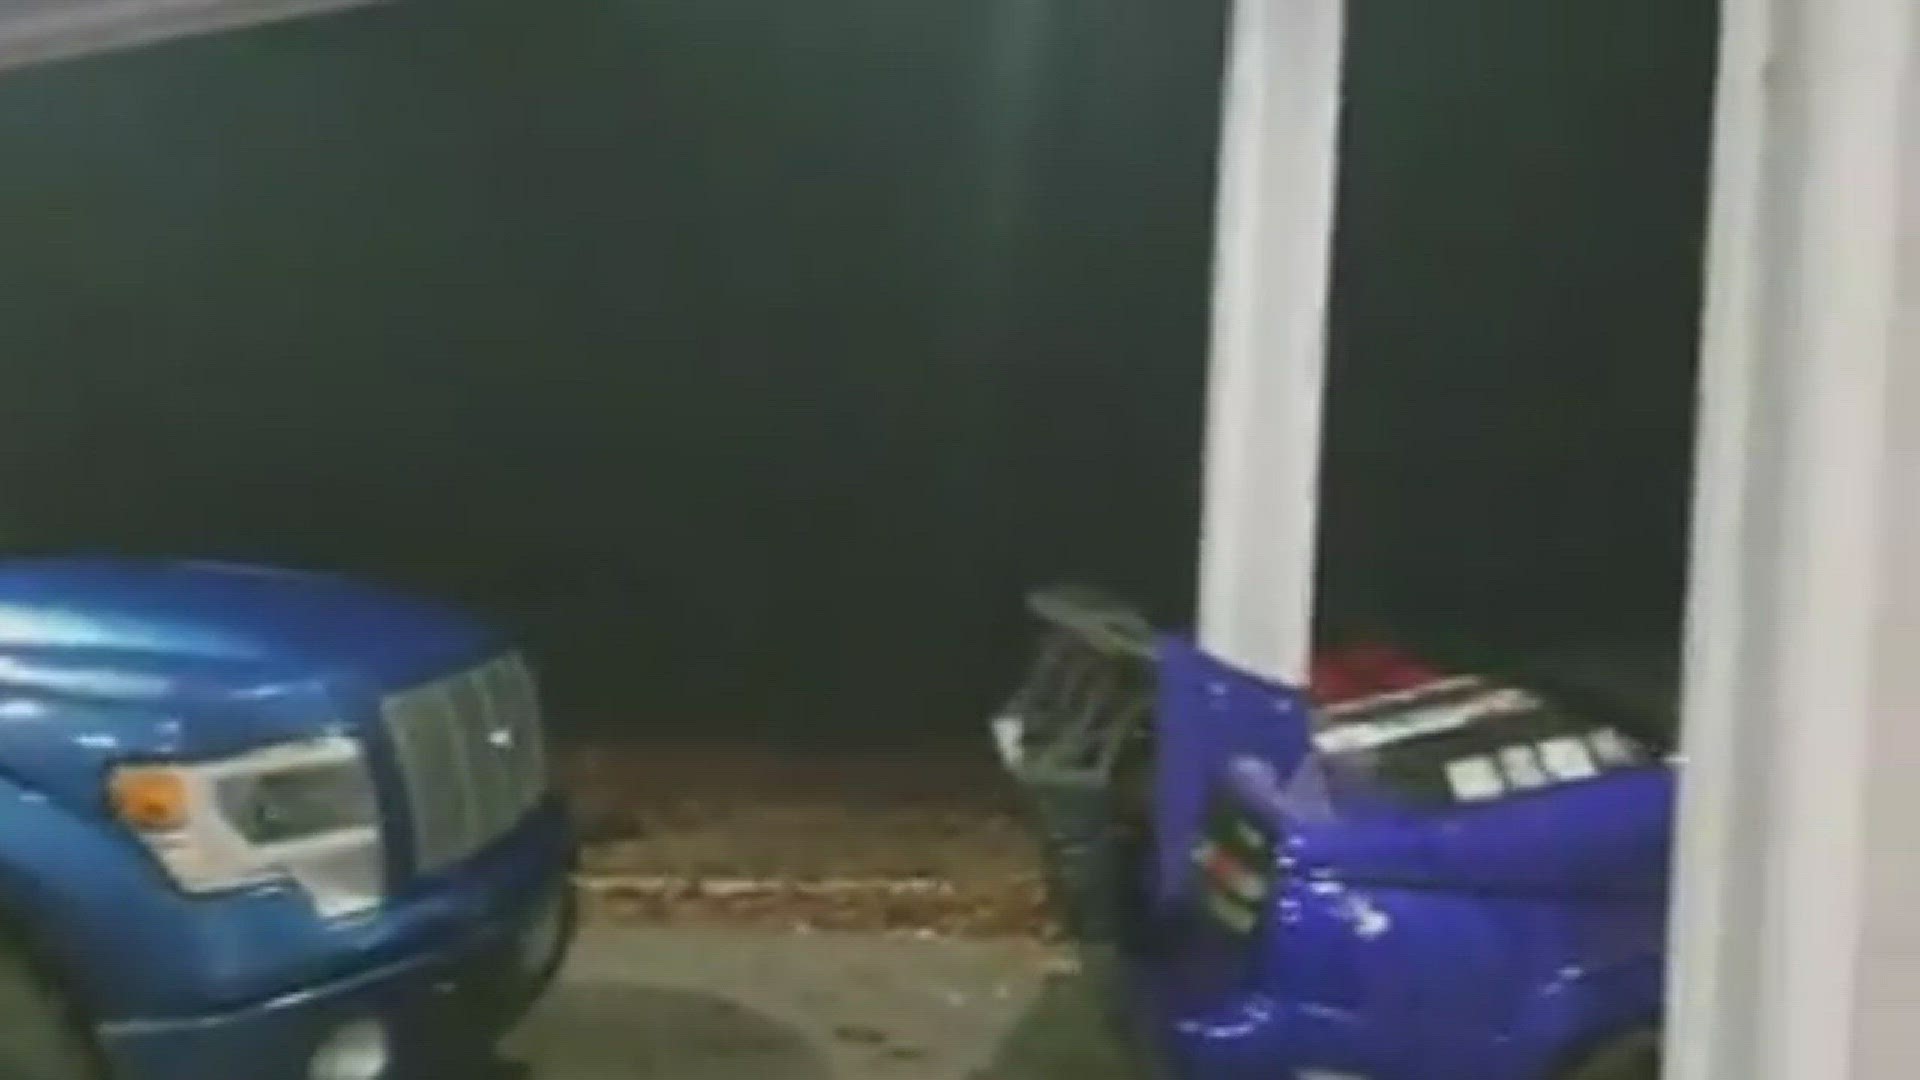 Dylan Ashley caught video of major hail storm during Sunday night's storms in East Texas. This was near Mount Pleasant.